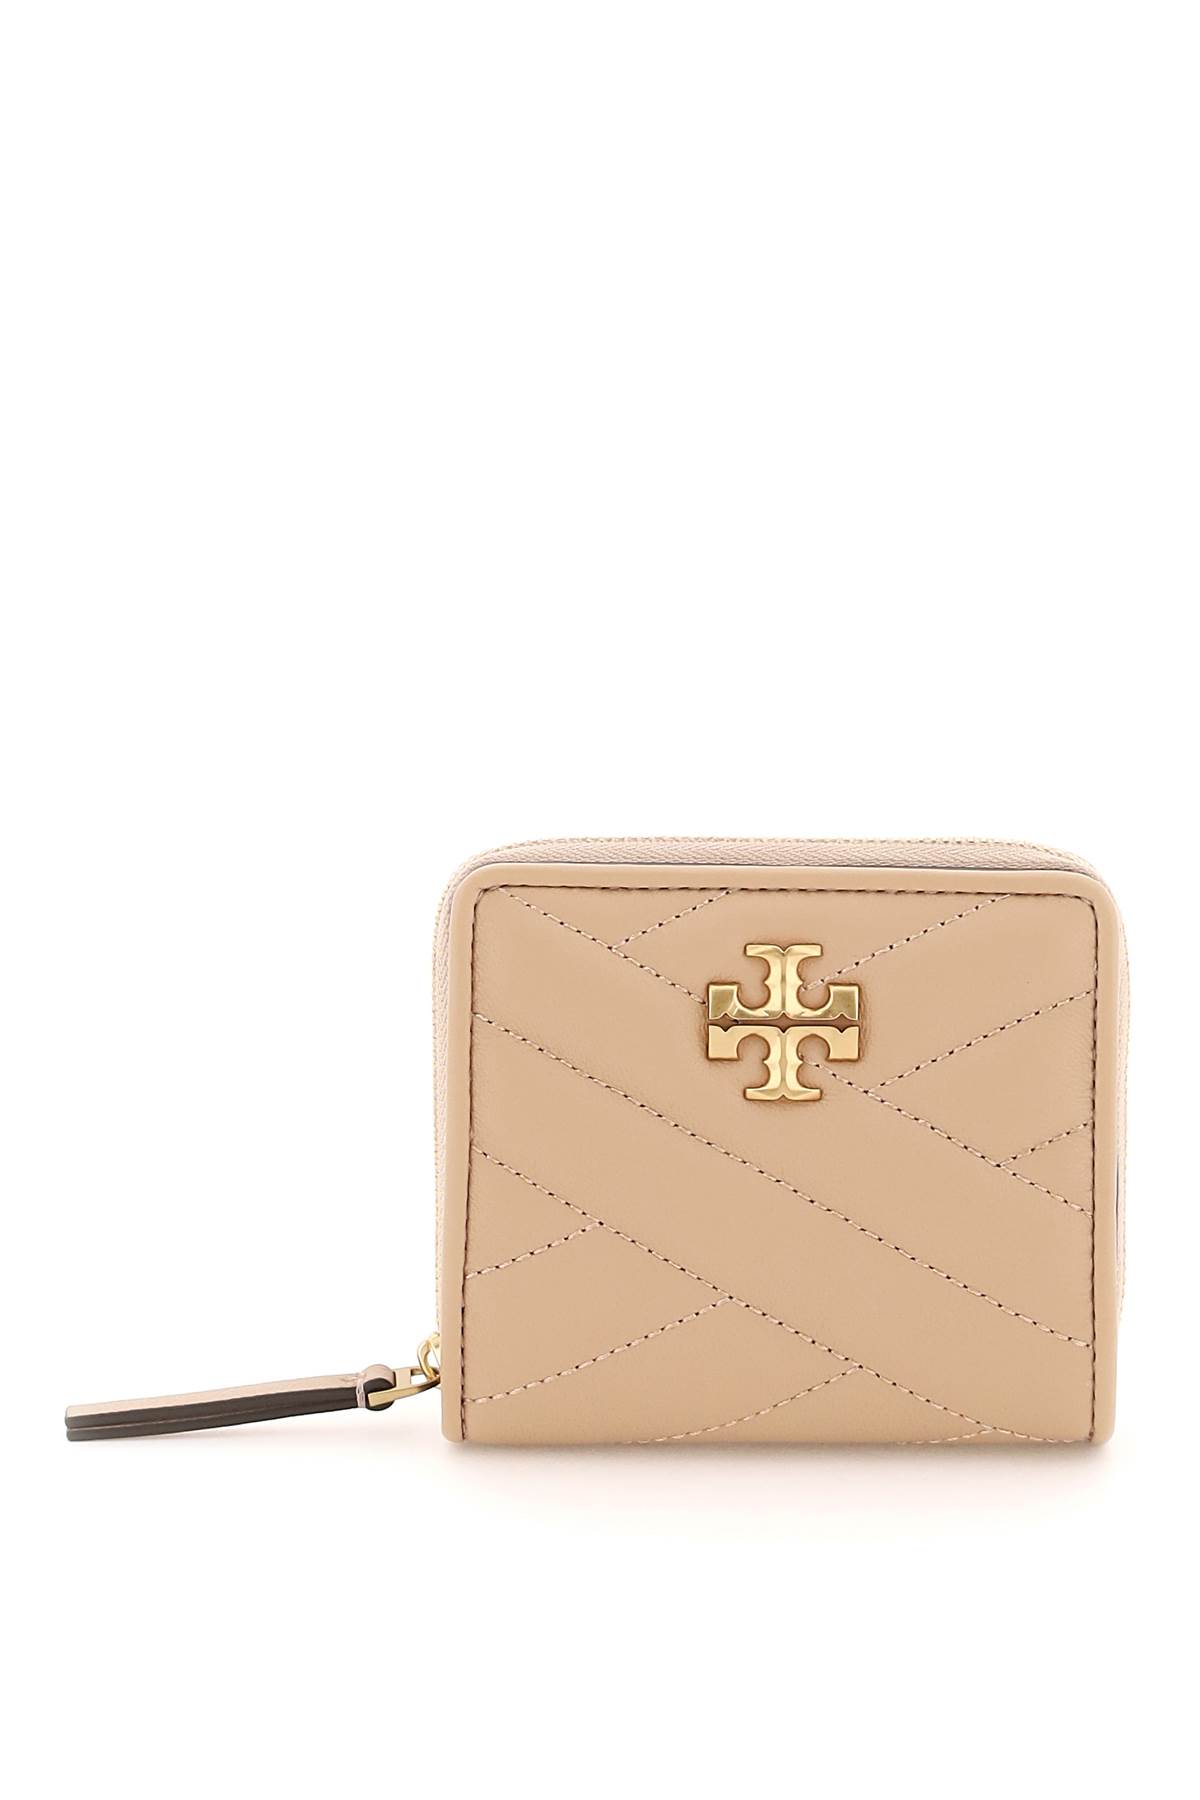 TORY BURCH QUILTED NAPPA KIRA WALLET